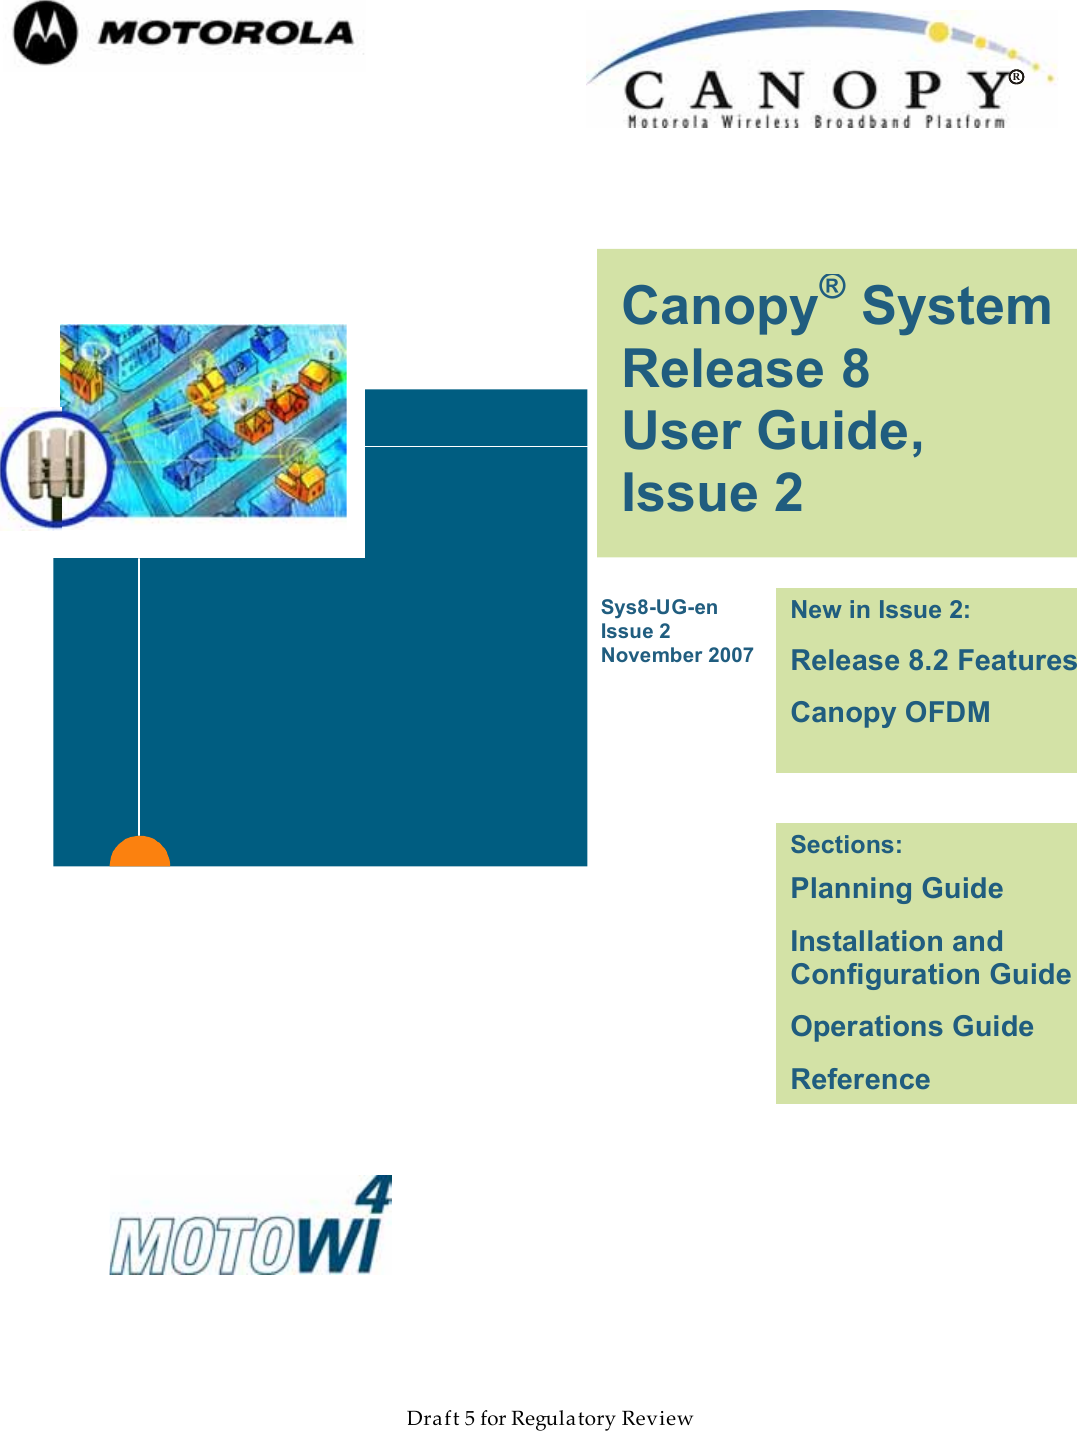                  March 200                  Through Software Release 6.       Draft 5 for Regulatory Review         Canopy® System Release 8 User Guide, Issue 2  Sys8-UG-en Issue 2 November 2007    Sections: Planning Guide Installation and Configuration Guide Operations Guide Reference Information  RNew in Issue 2: Release 8.2 Features Canopy OFDM 